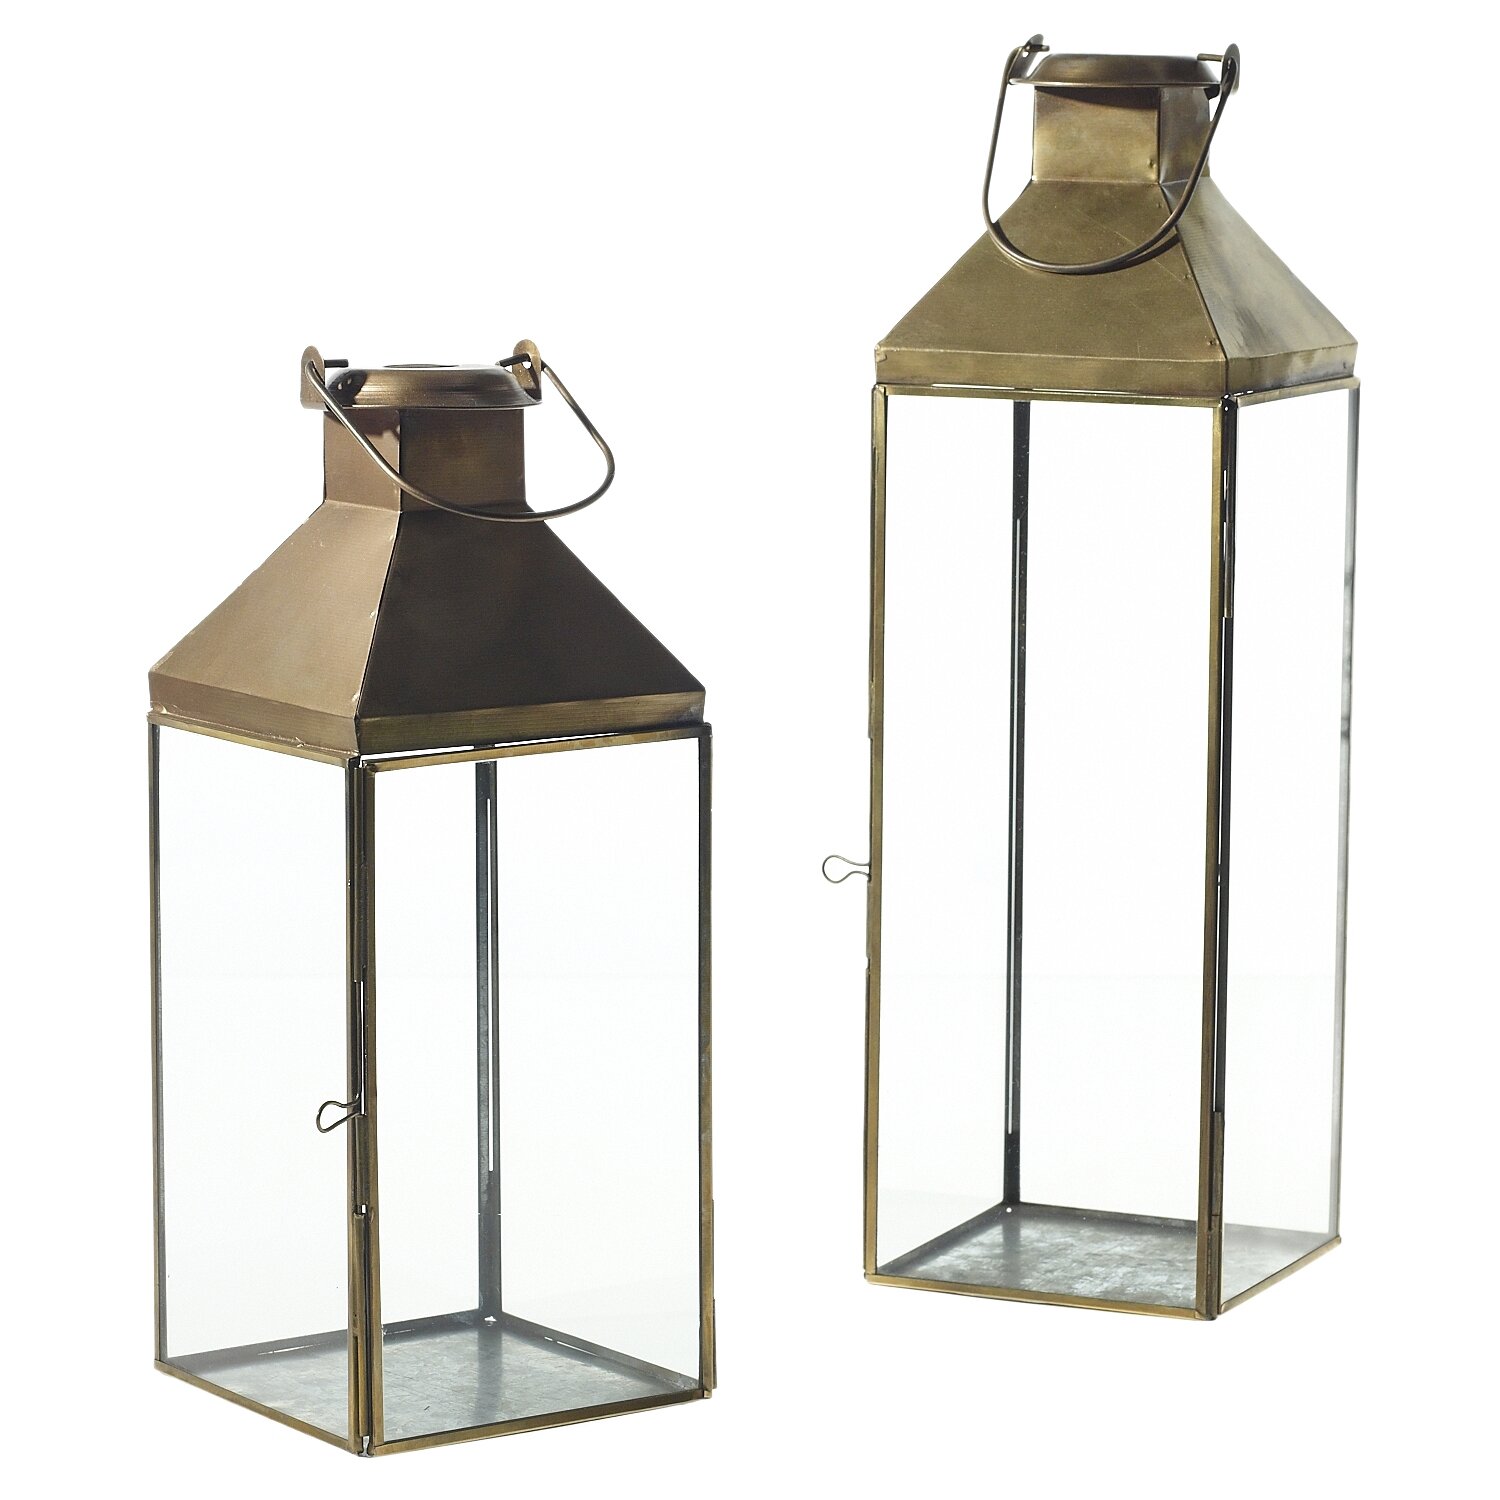 Gold Lantern (12", 18") - $10/each ($15 with candle)